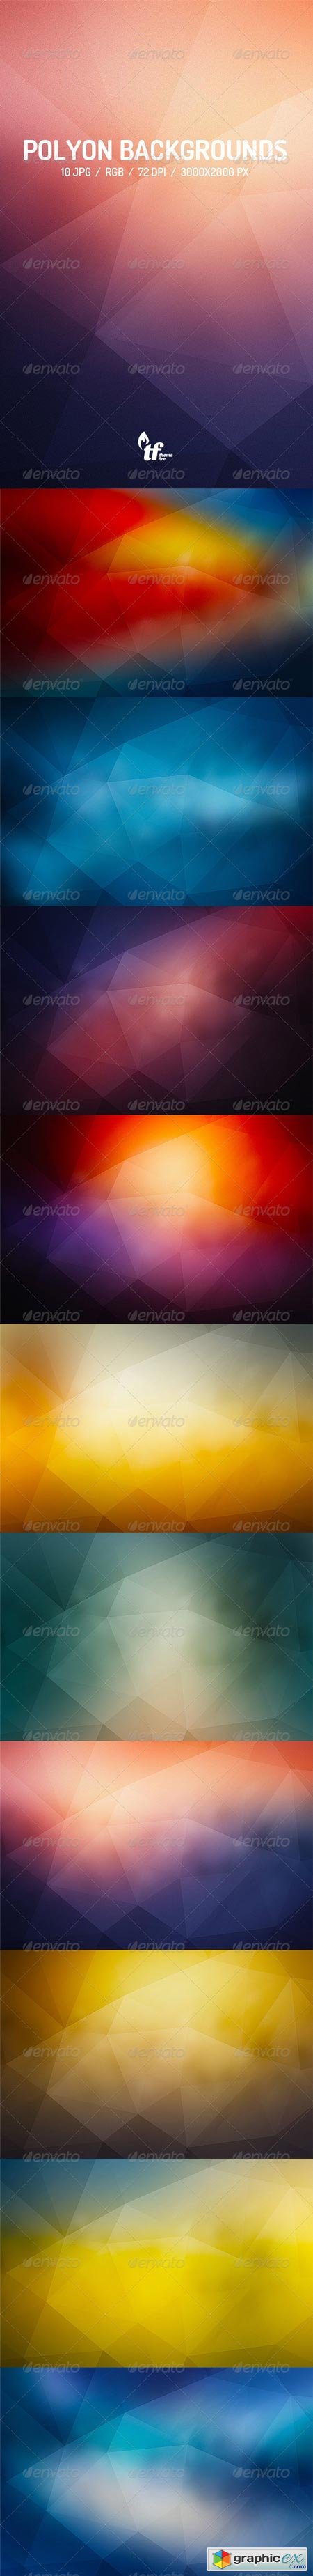 Abstract Poly Backgrounds 7821665